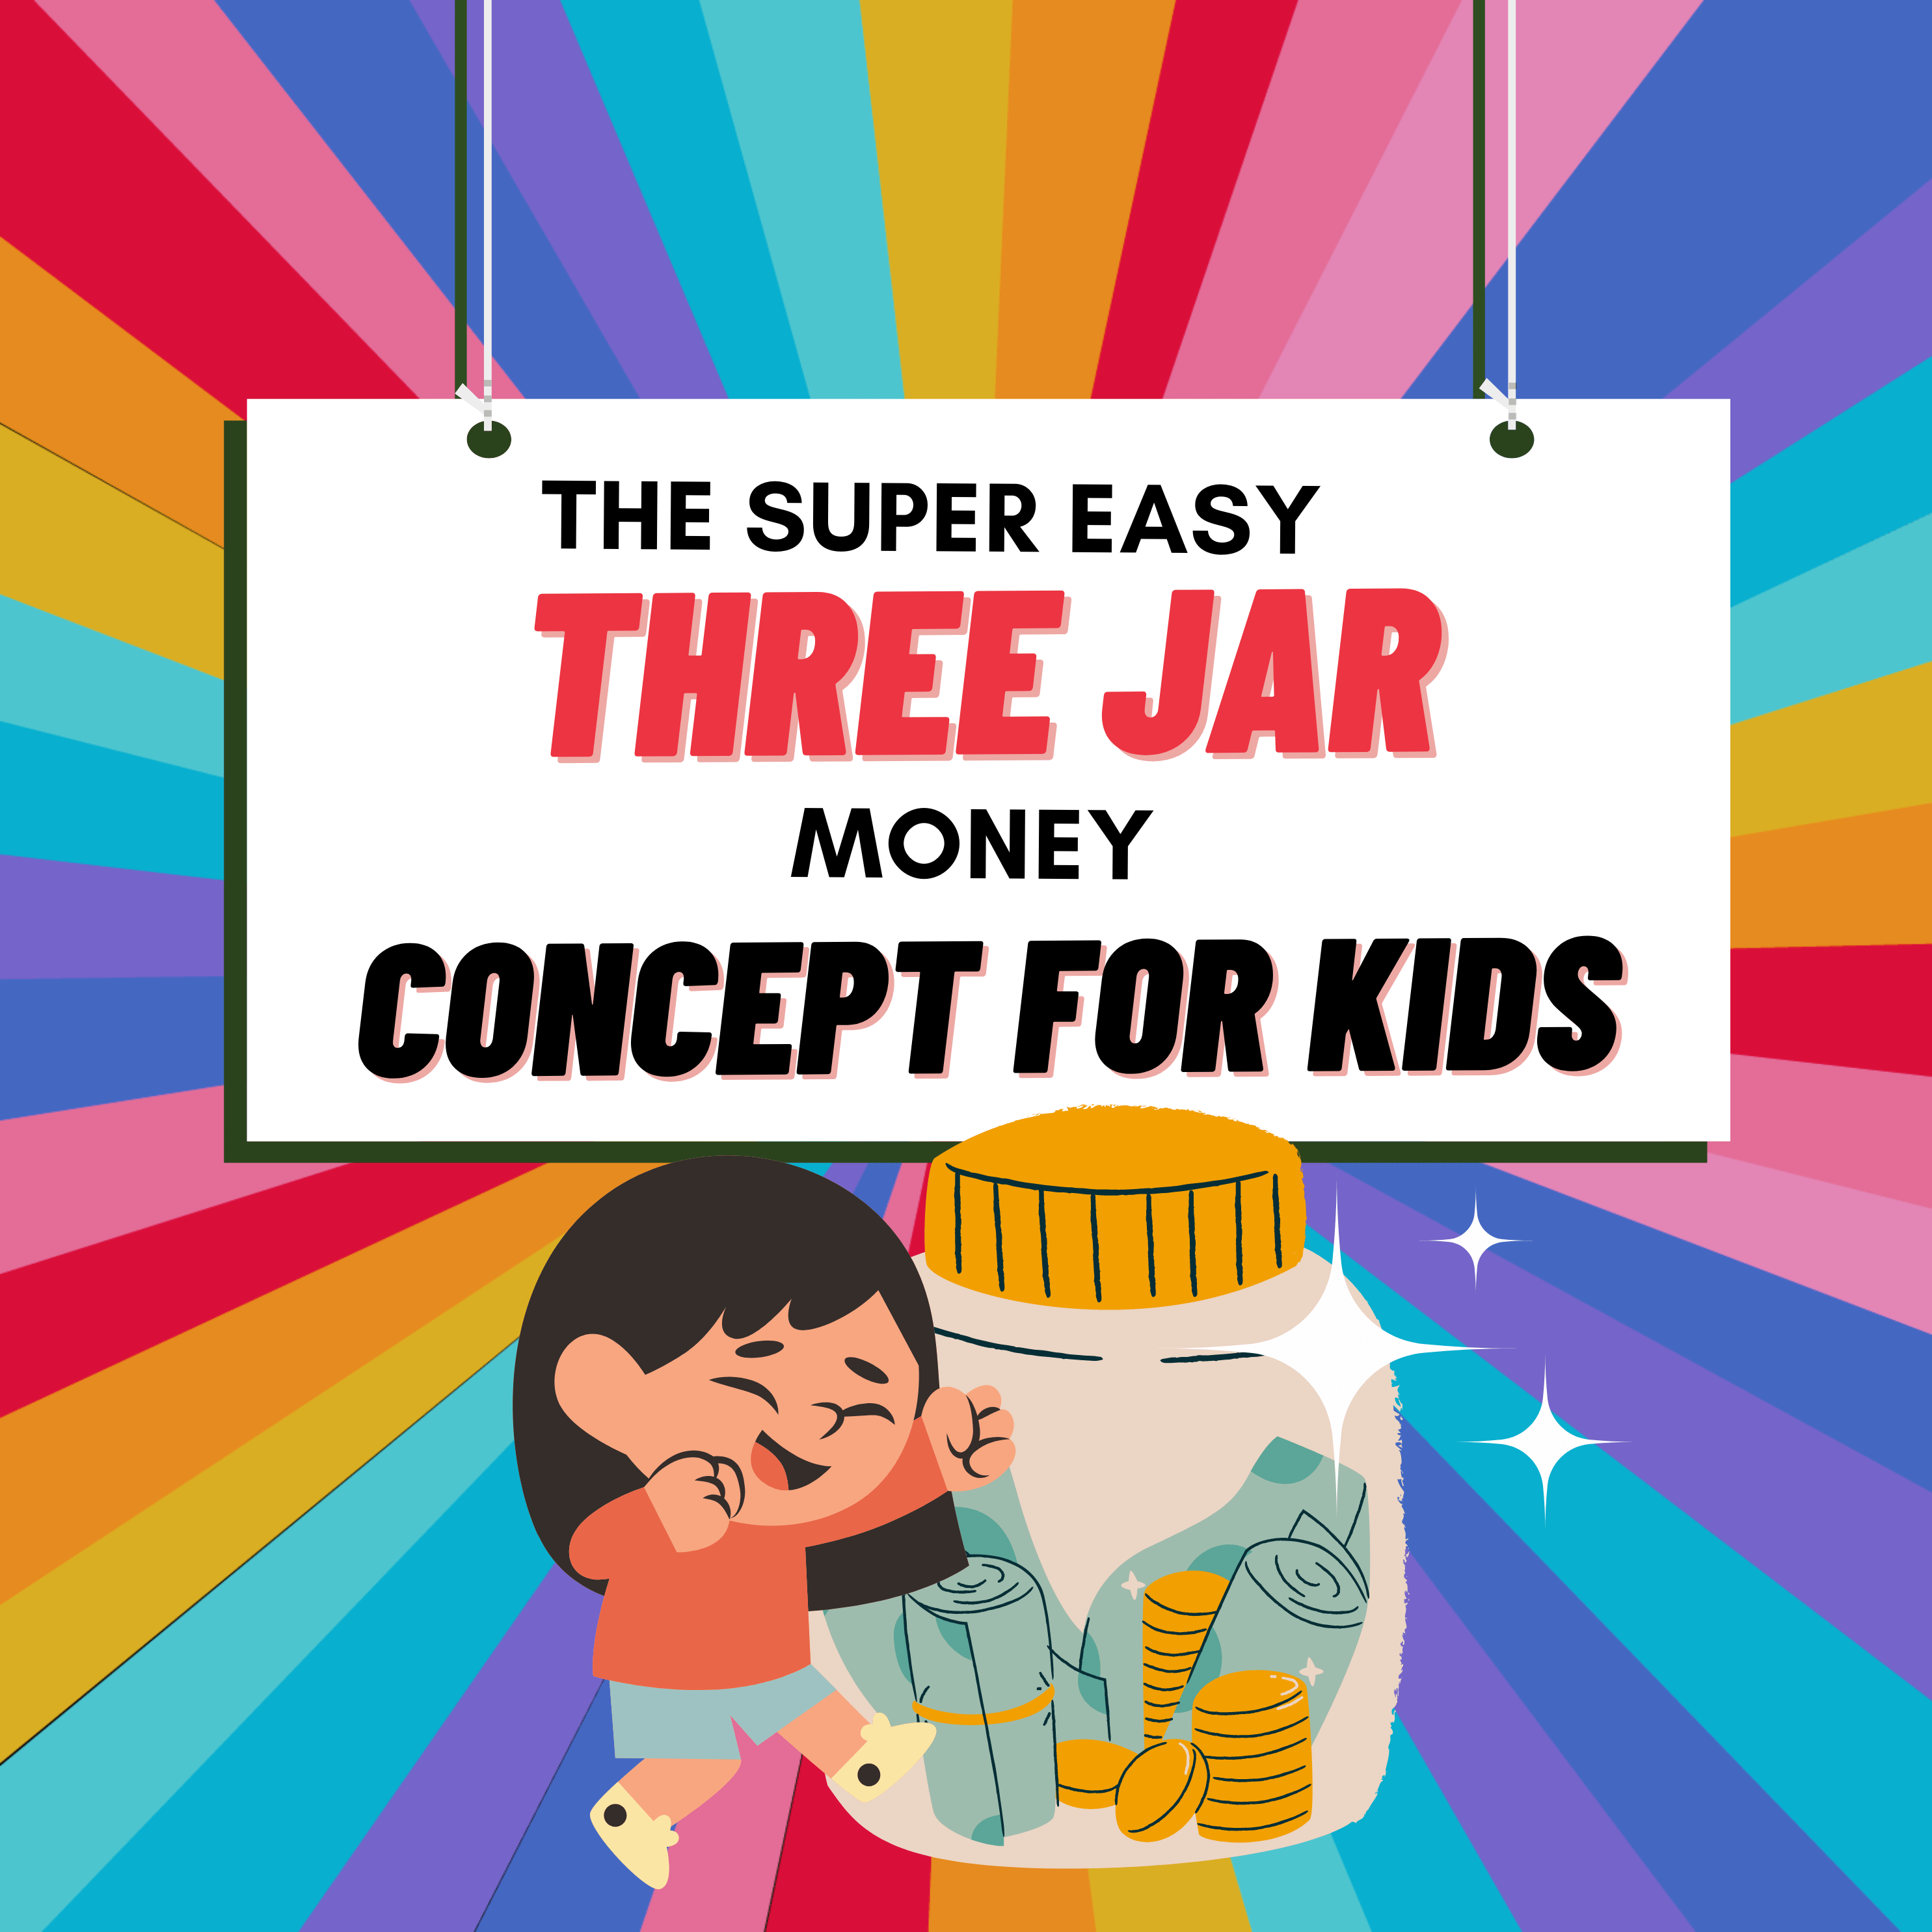 THE THREE MONEY JAR CONCEPT FOR KIDS